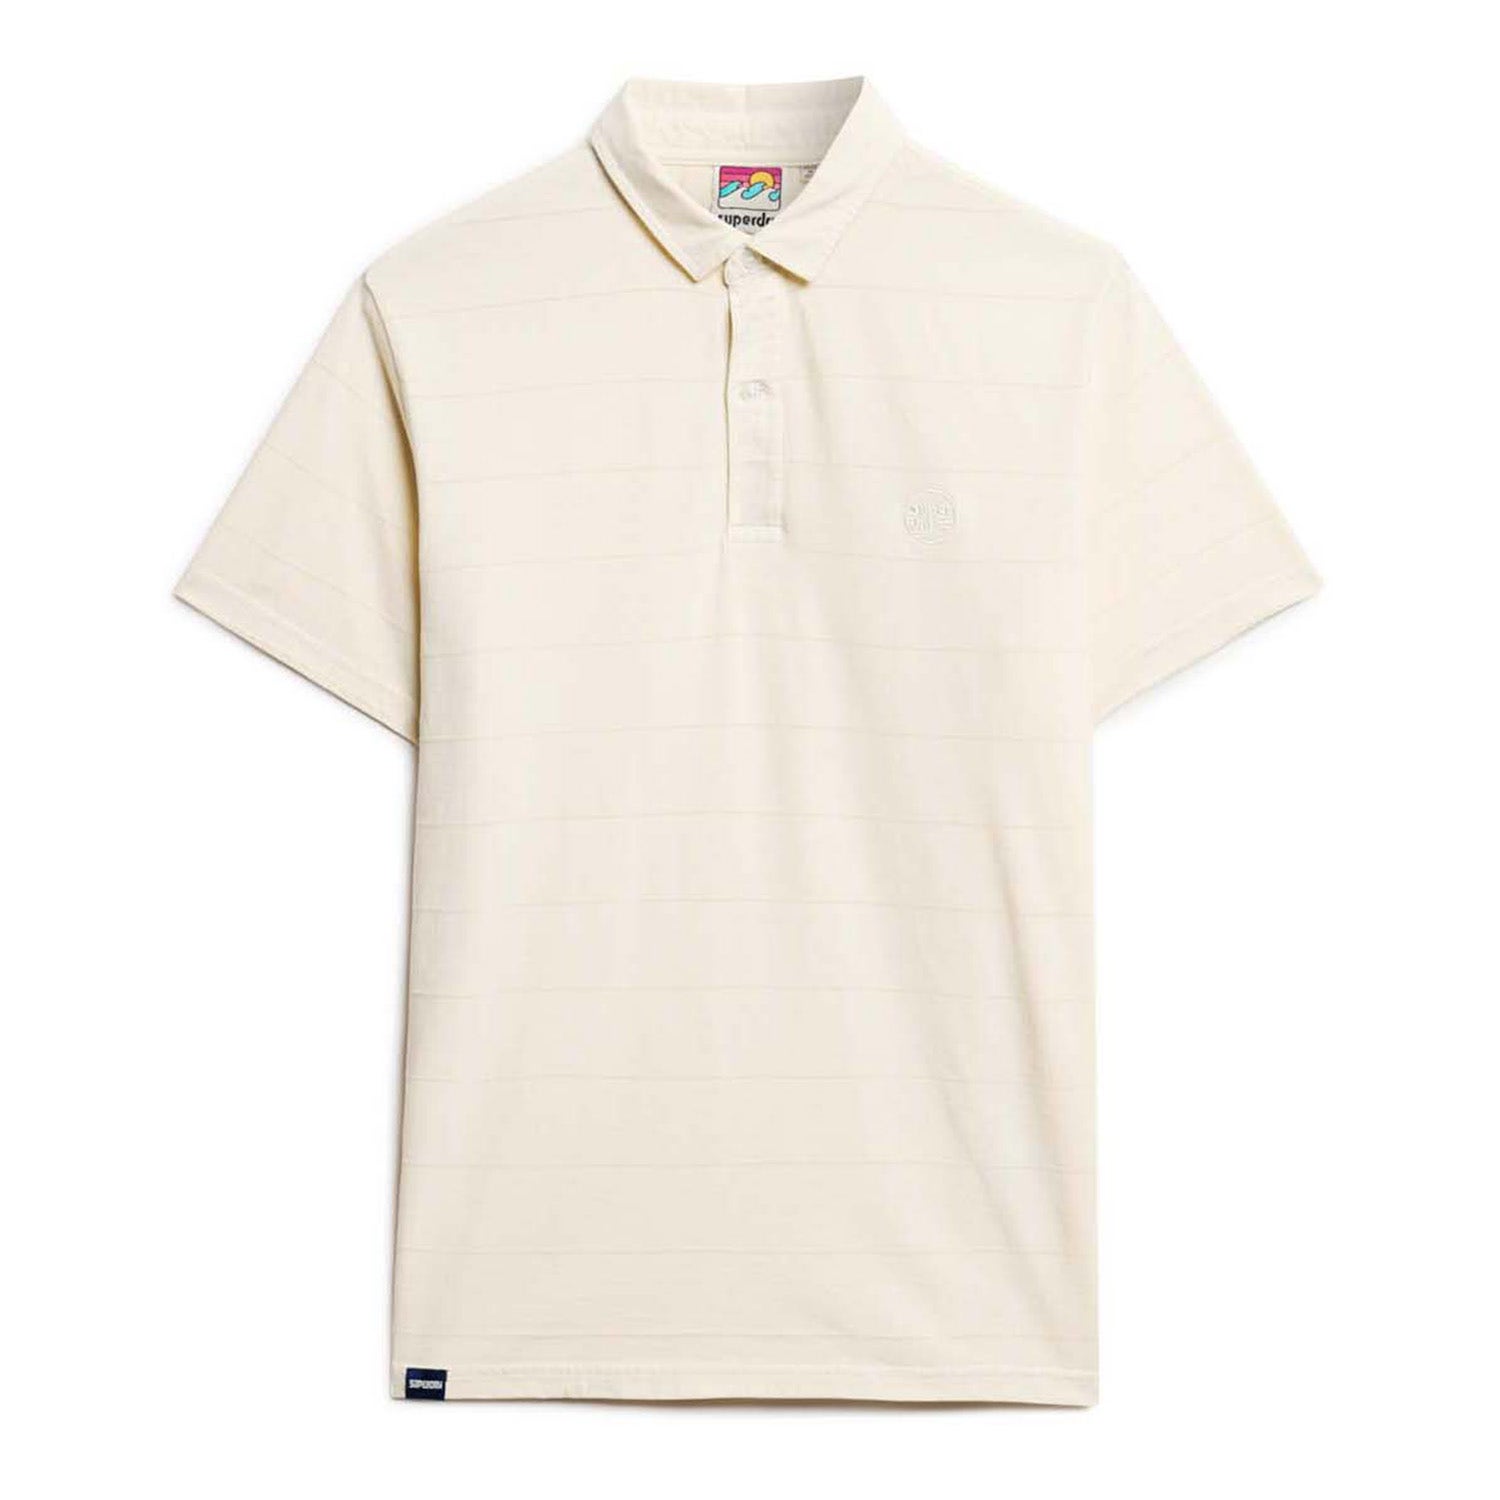 Superdry Textured Jersey Polo